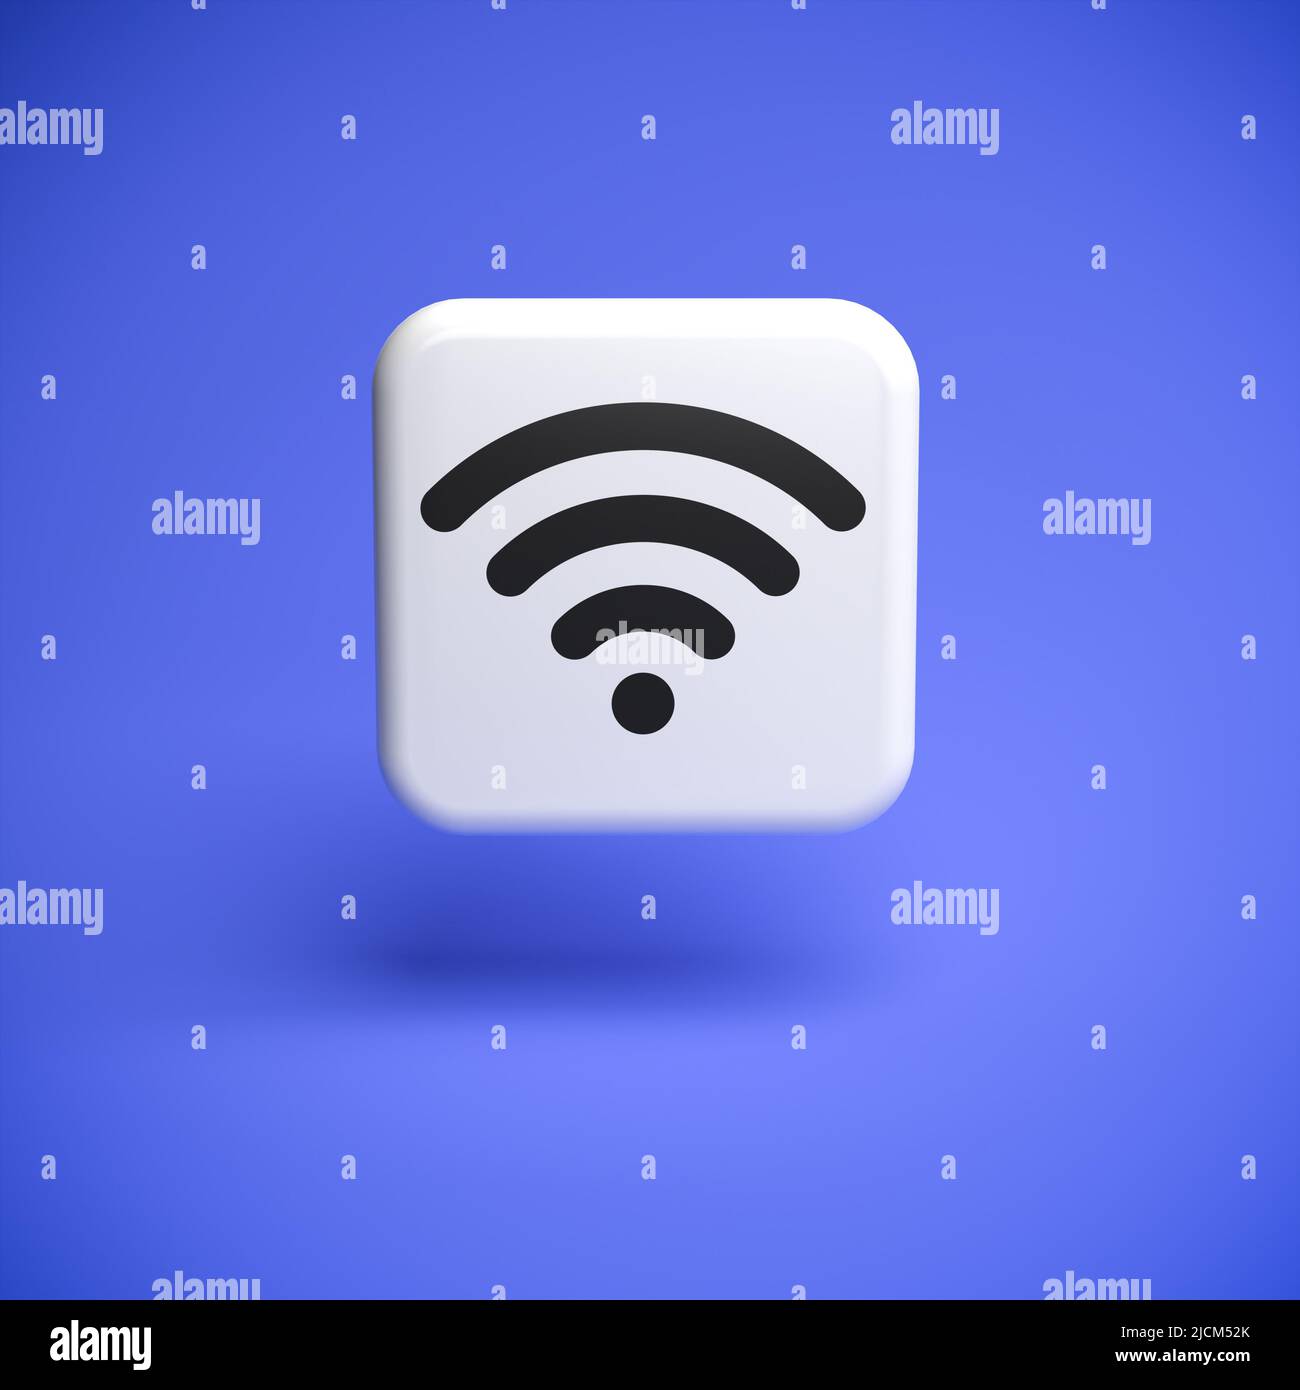 A Wifi Logo hovering over a seamless blue background Stock Photo